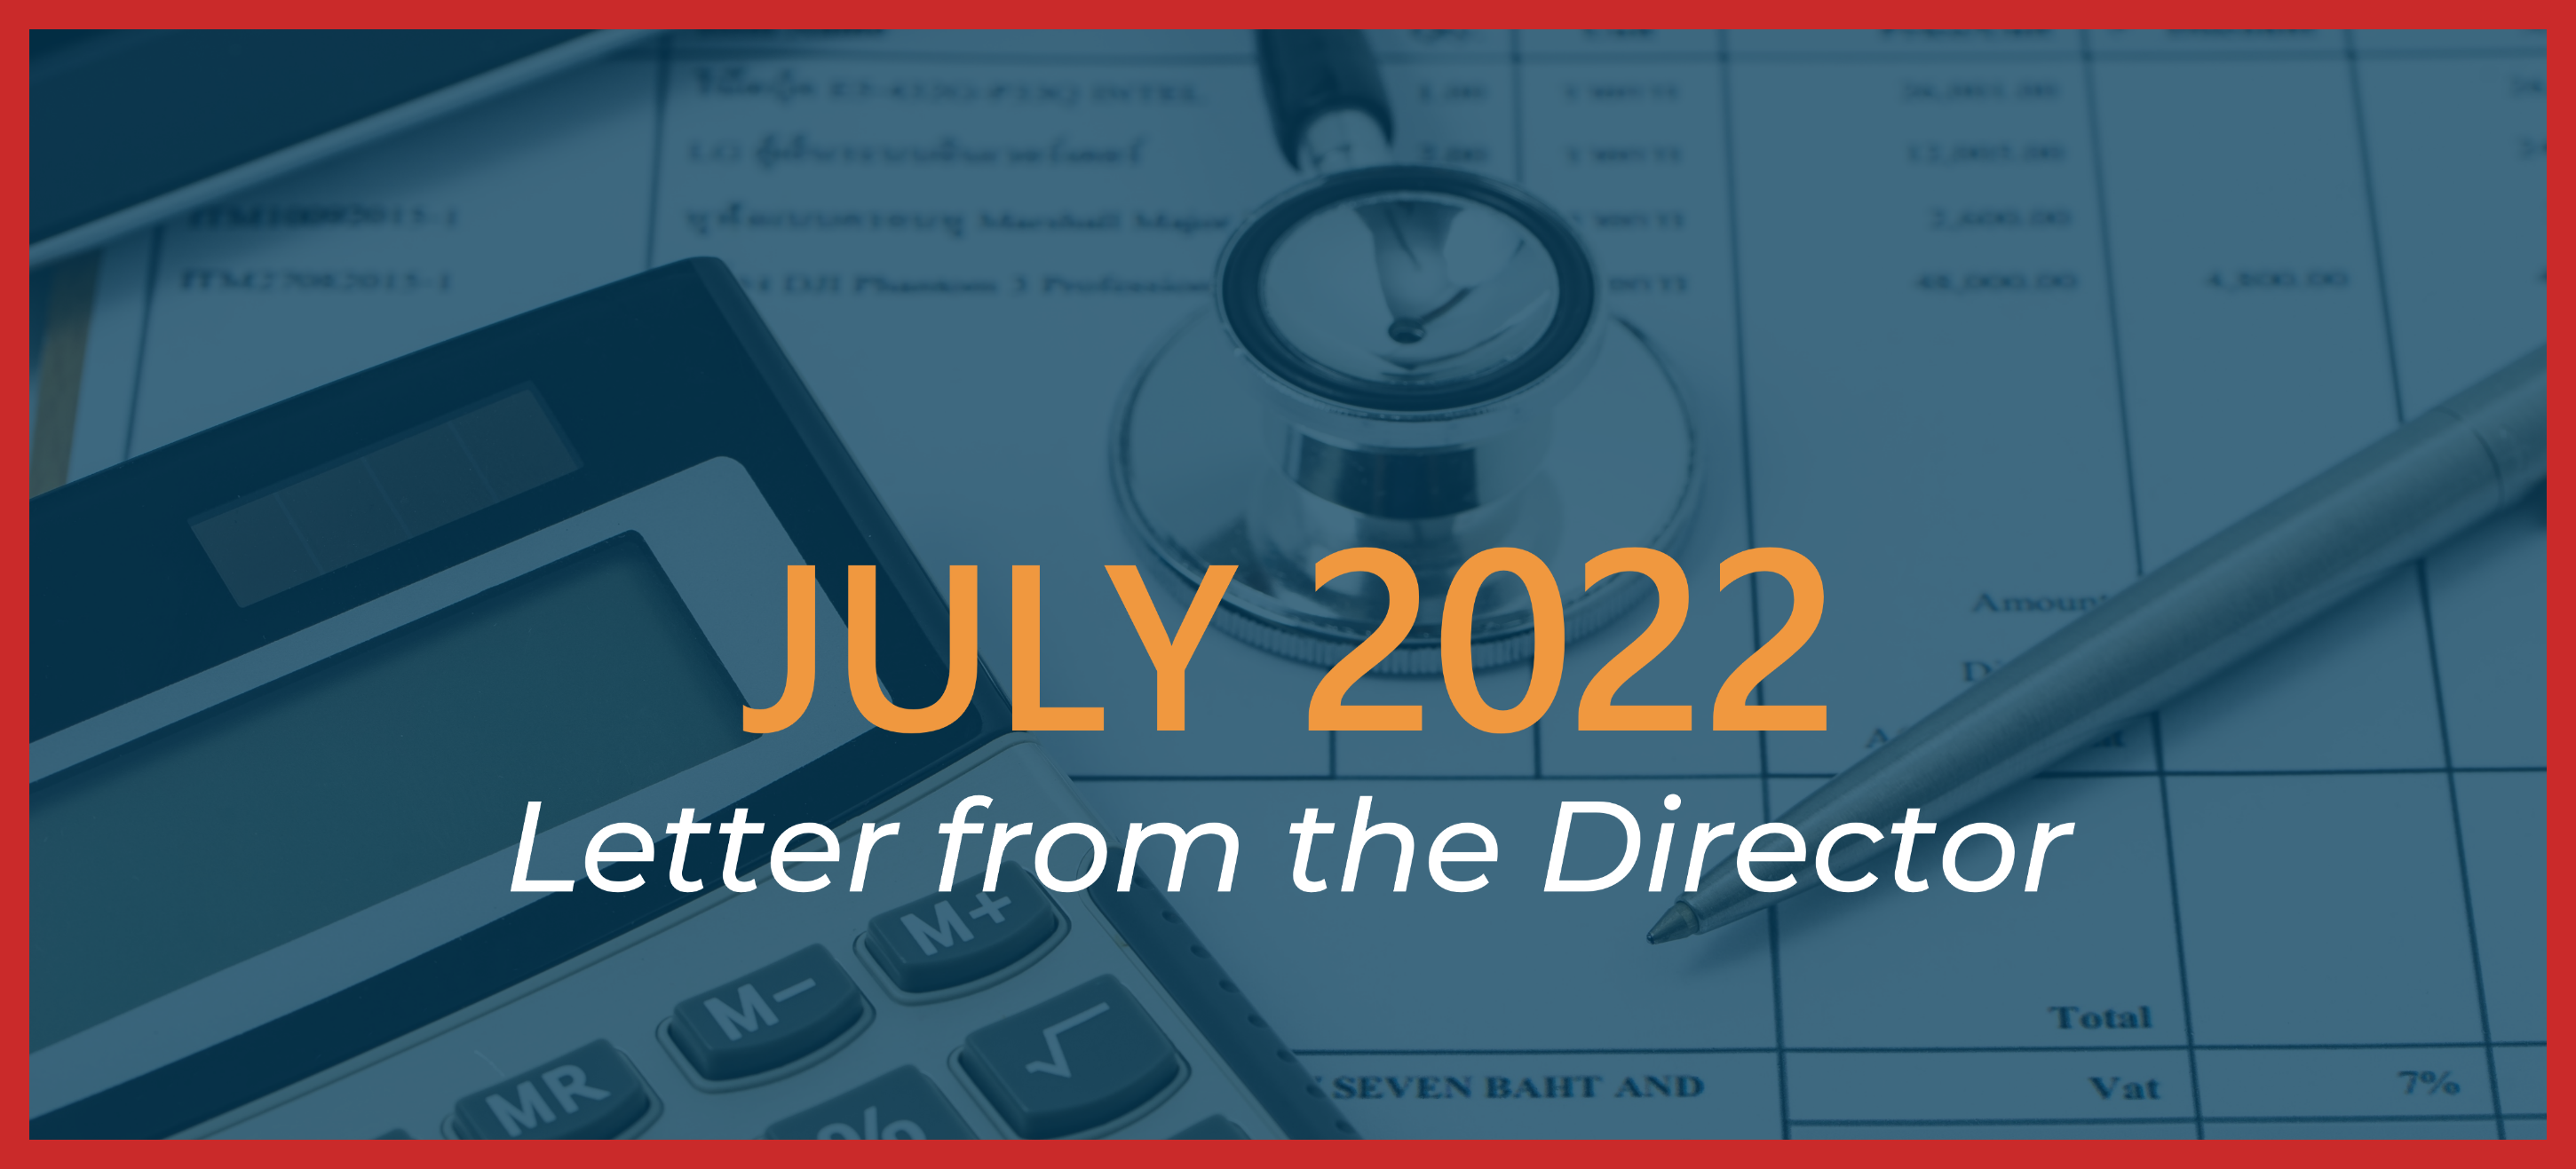 July 2022 Letter from the Director